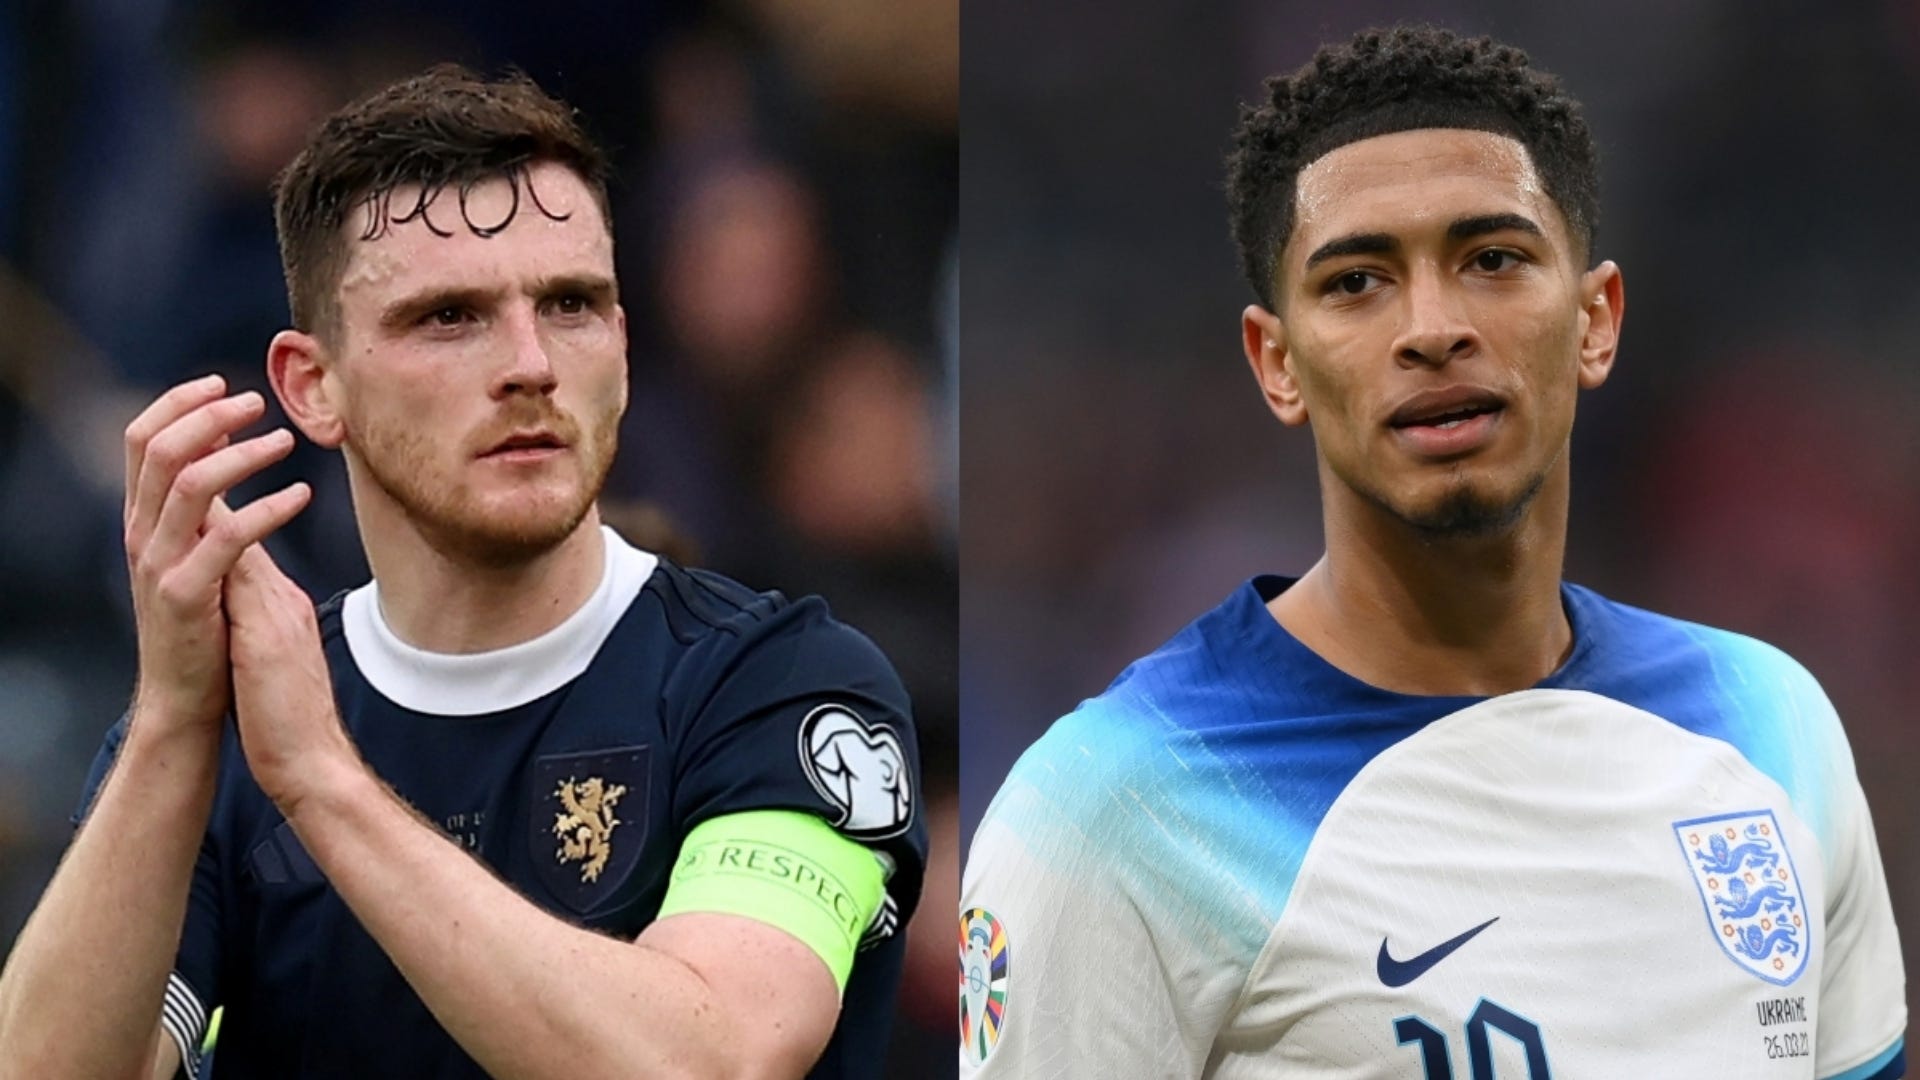 Scotland vs England Live stream, TV channel, kick-off time and where to watch Goal US